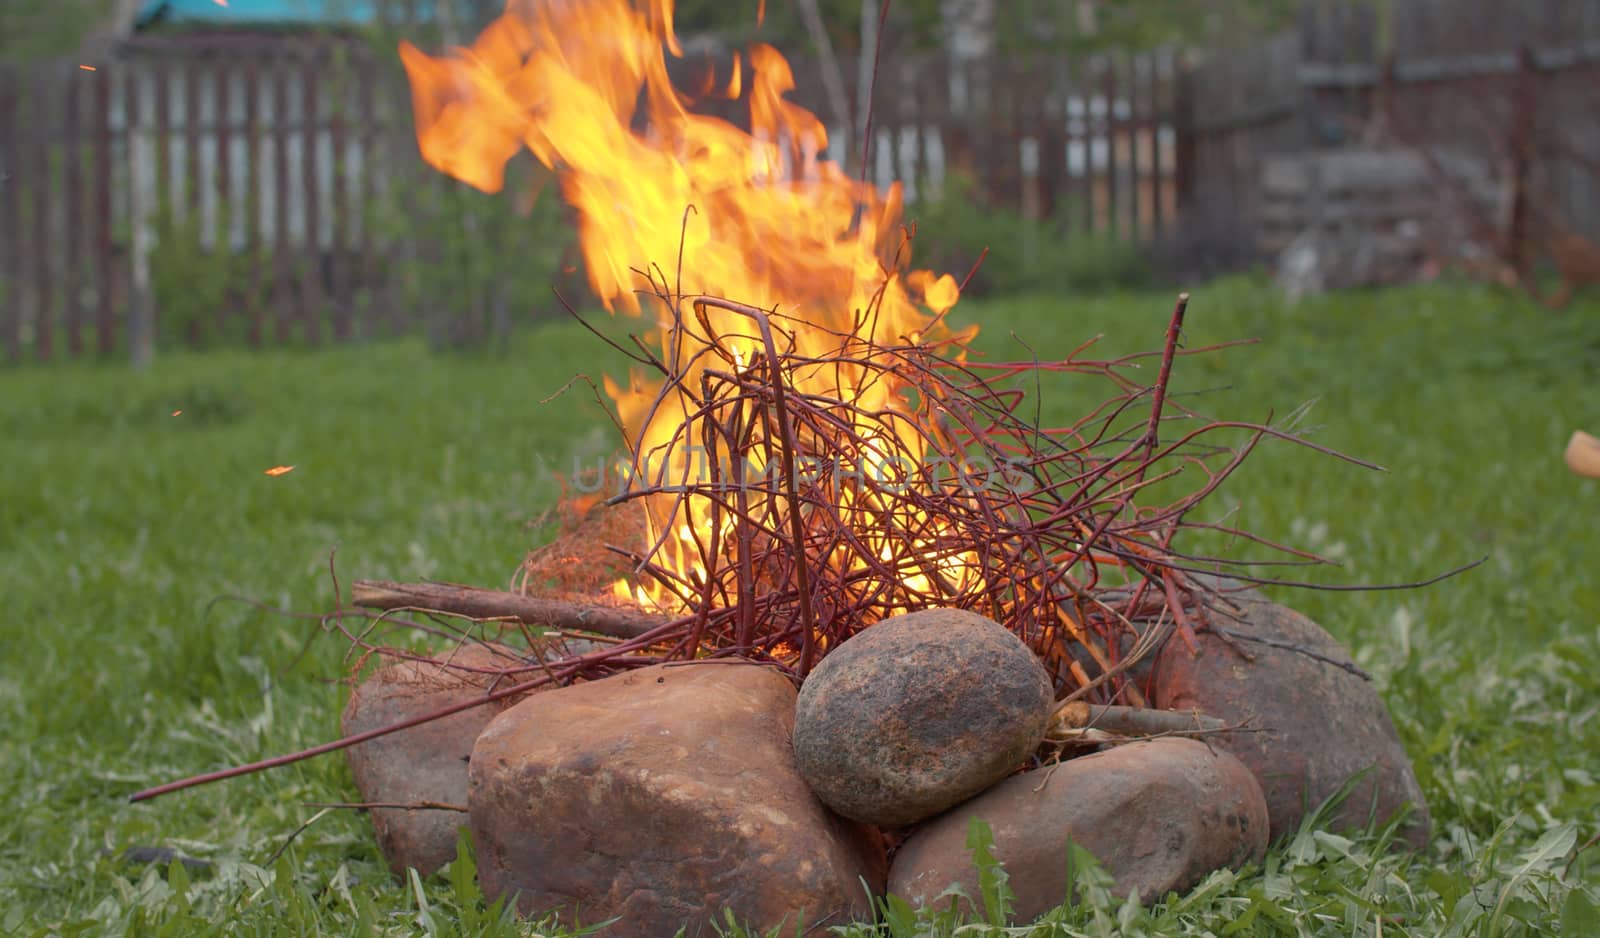 Bonfire burning in the yard of a country house. Thin tree branches and brushwood burn among stones in a meadow on a spring day.